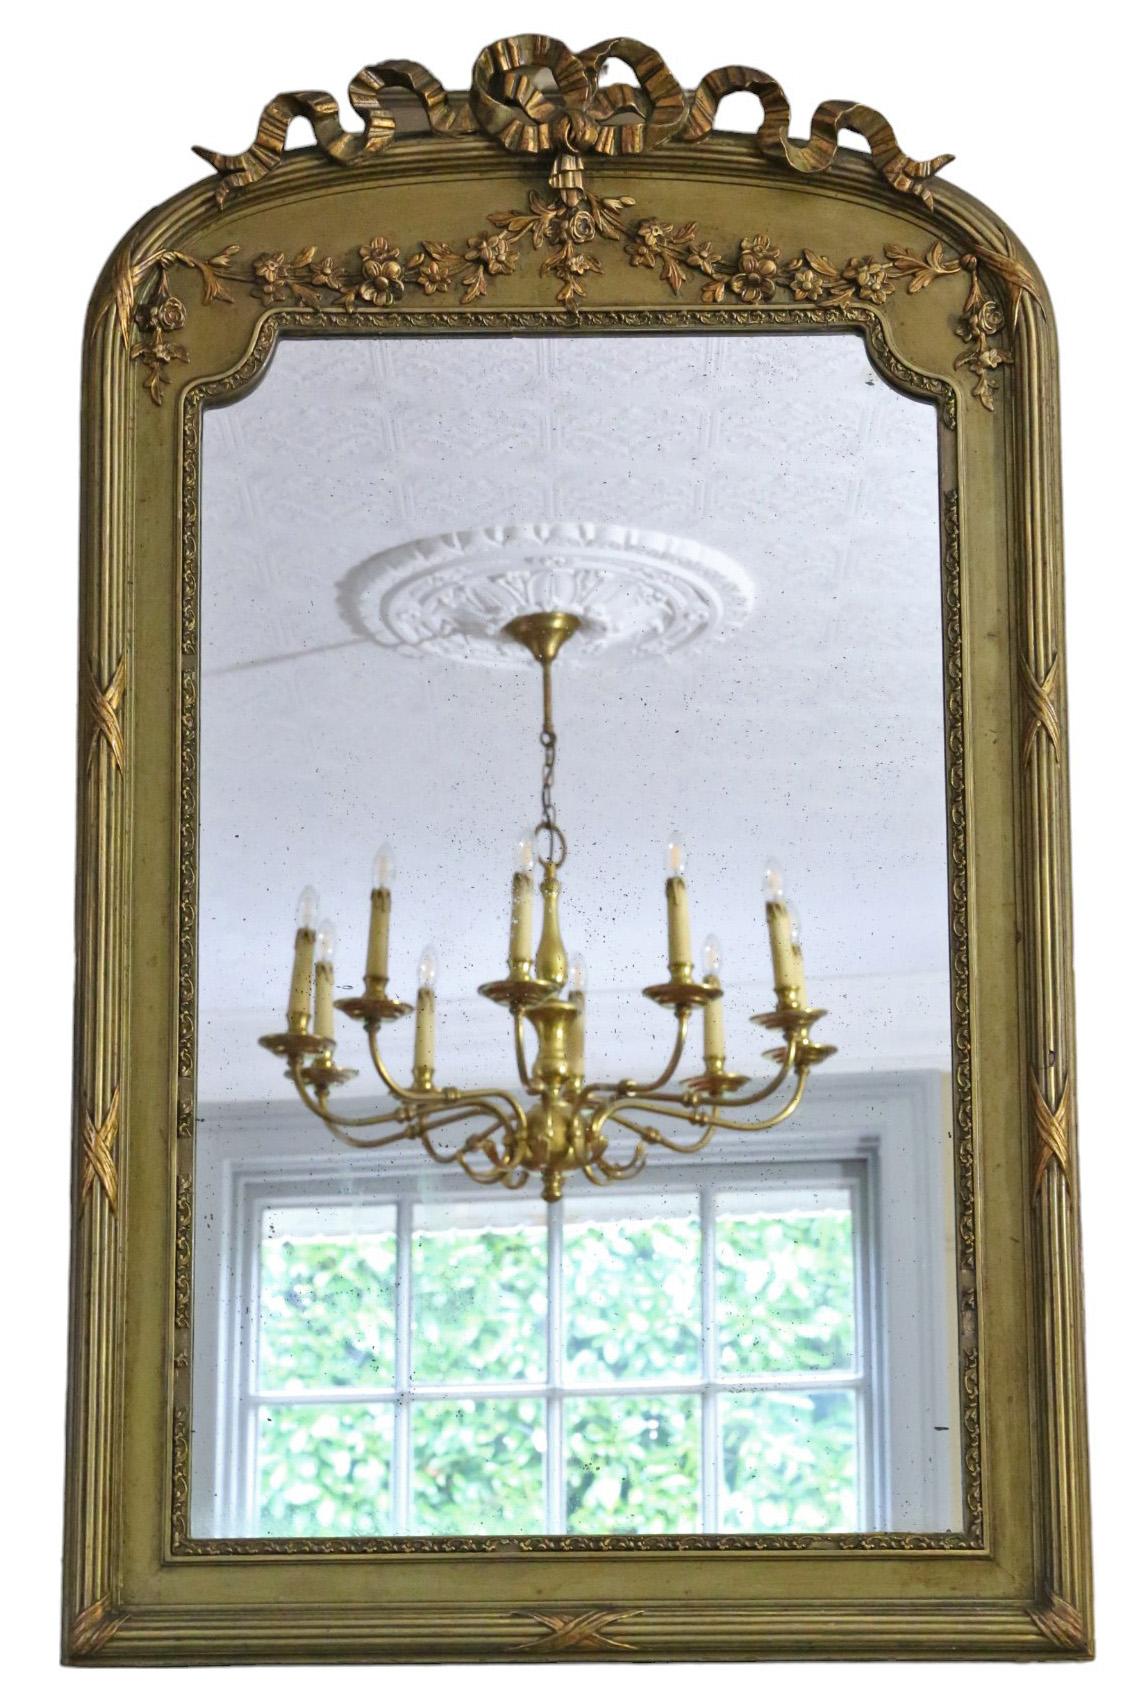 Antique large gilt overmantle wall mirror, crafted around 1900, boasting fine quality with ribbon and floral decoration.

This mirror captivates with its simple yet striking design, infusing character into any suitable space. The frame is sturdy,